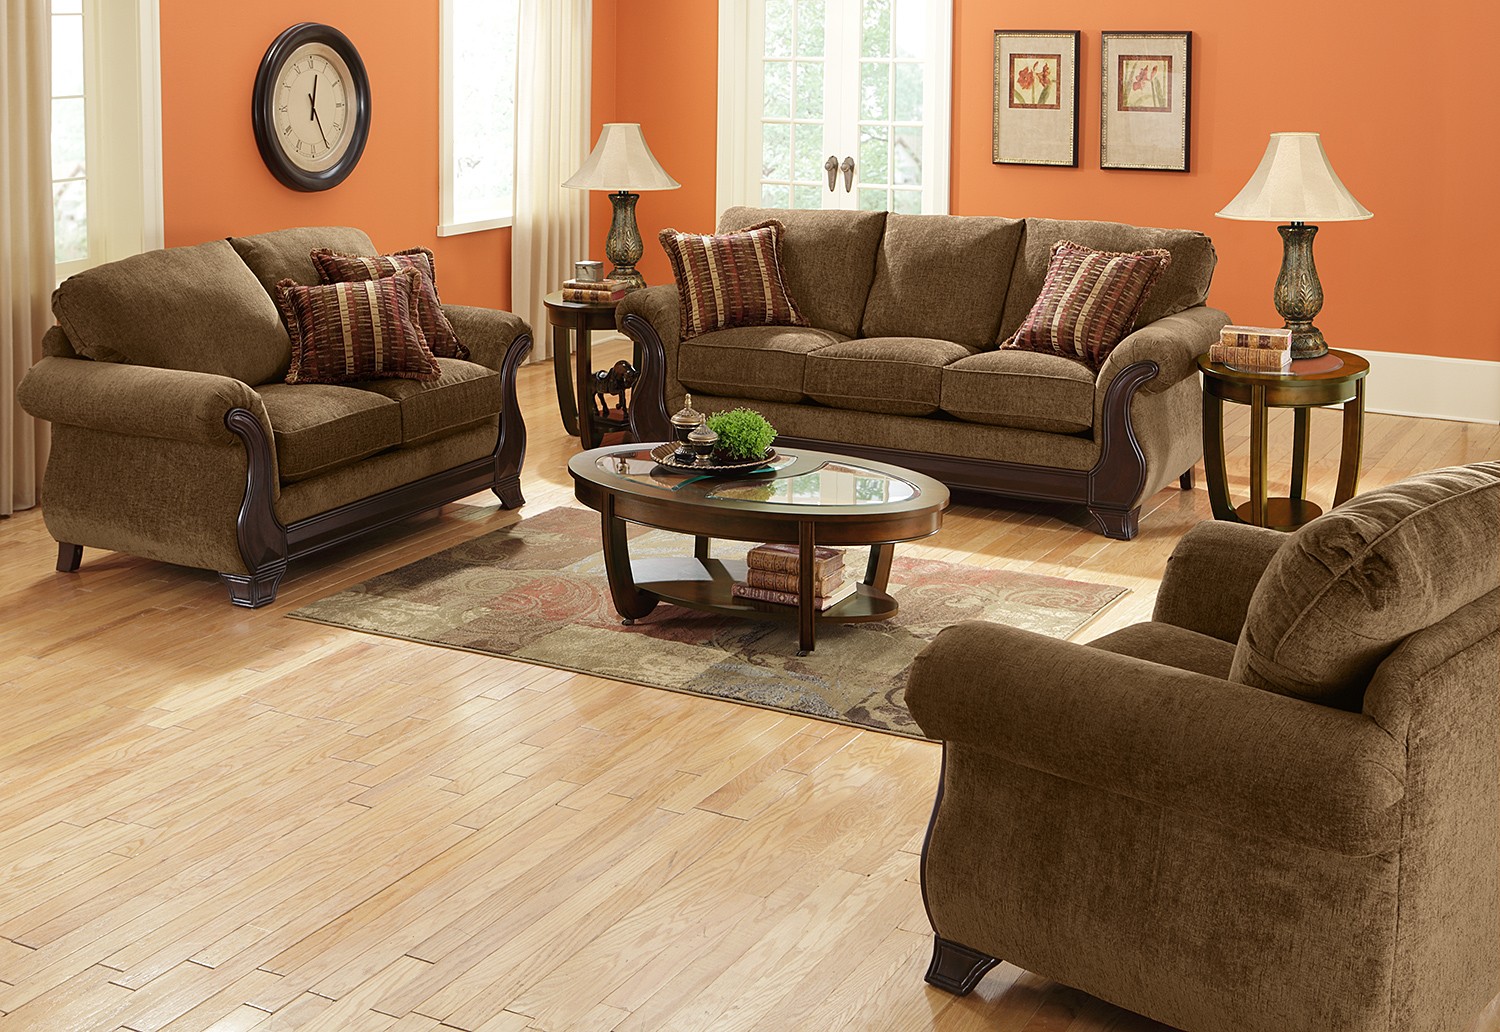 what to look for when buying living room furniture